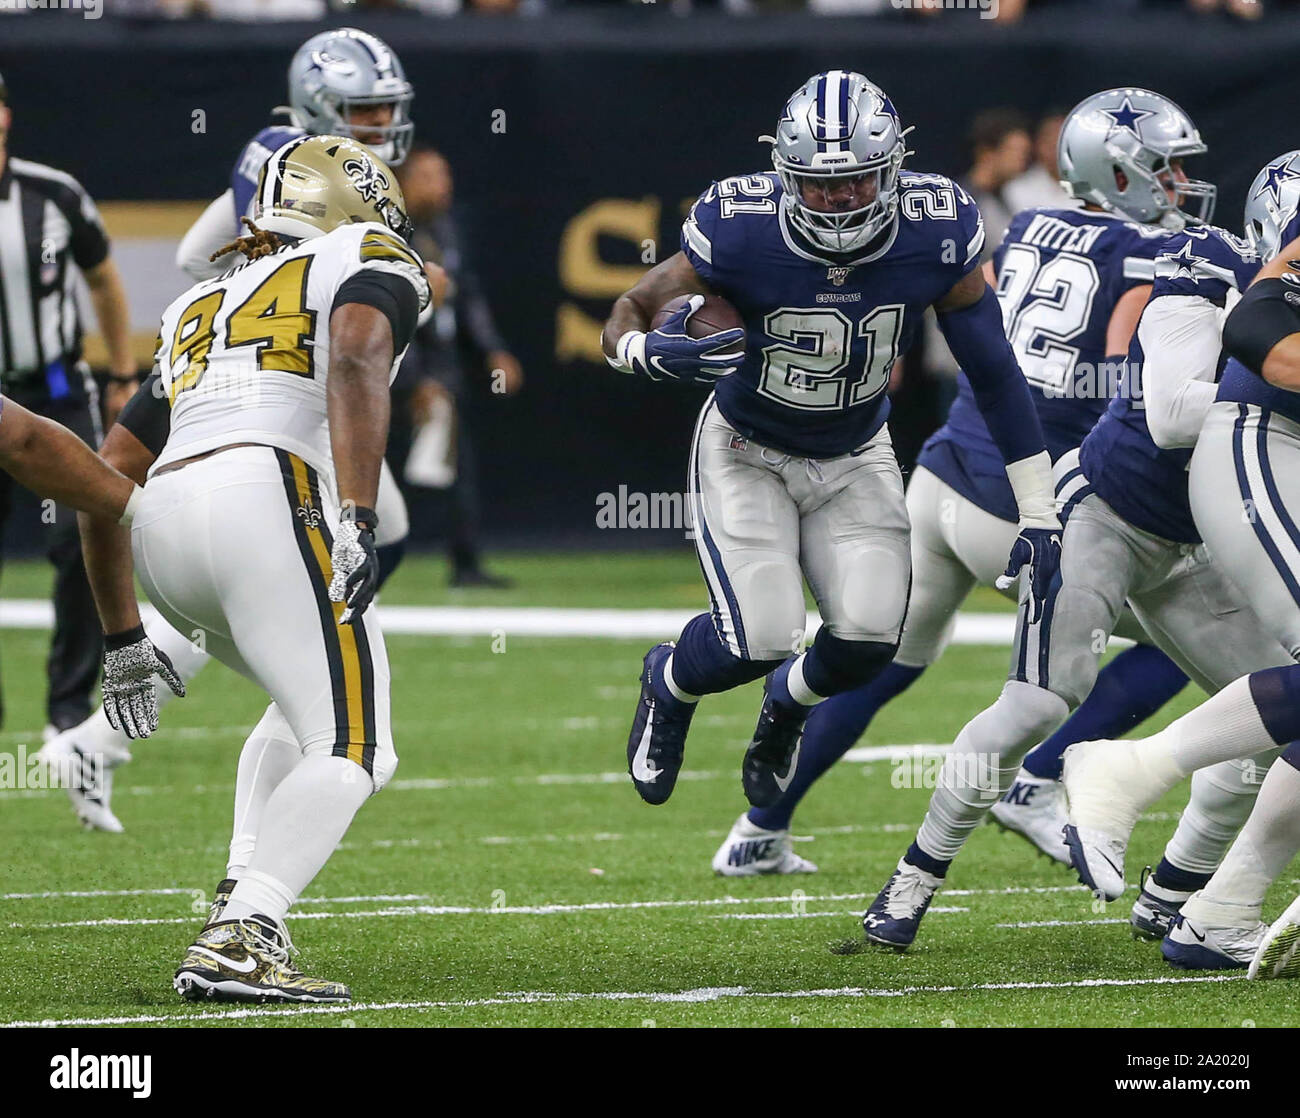 New Orleans, LA, USA. 29th Sep, 2019. Dallas Cowboy's running back Ezekiel Elliott (21) runs through a hole as New Orleans Saints defensive end Cam Jordan (94) goes for a tackle during NFL game action between the New Orleans Saints and the Dallas Cowboys at the Mercedes Benz Superdome in New Orleans, LA. Jonathan Mailhes/CSM/Alamy Live News Stock Photo